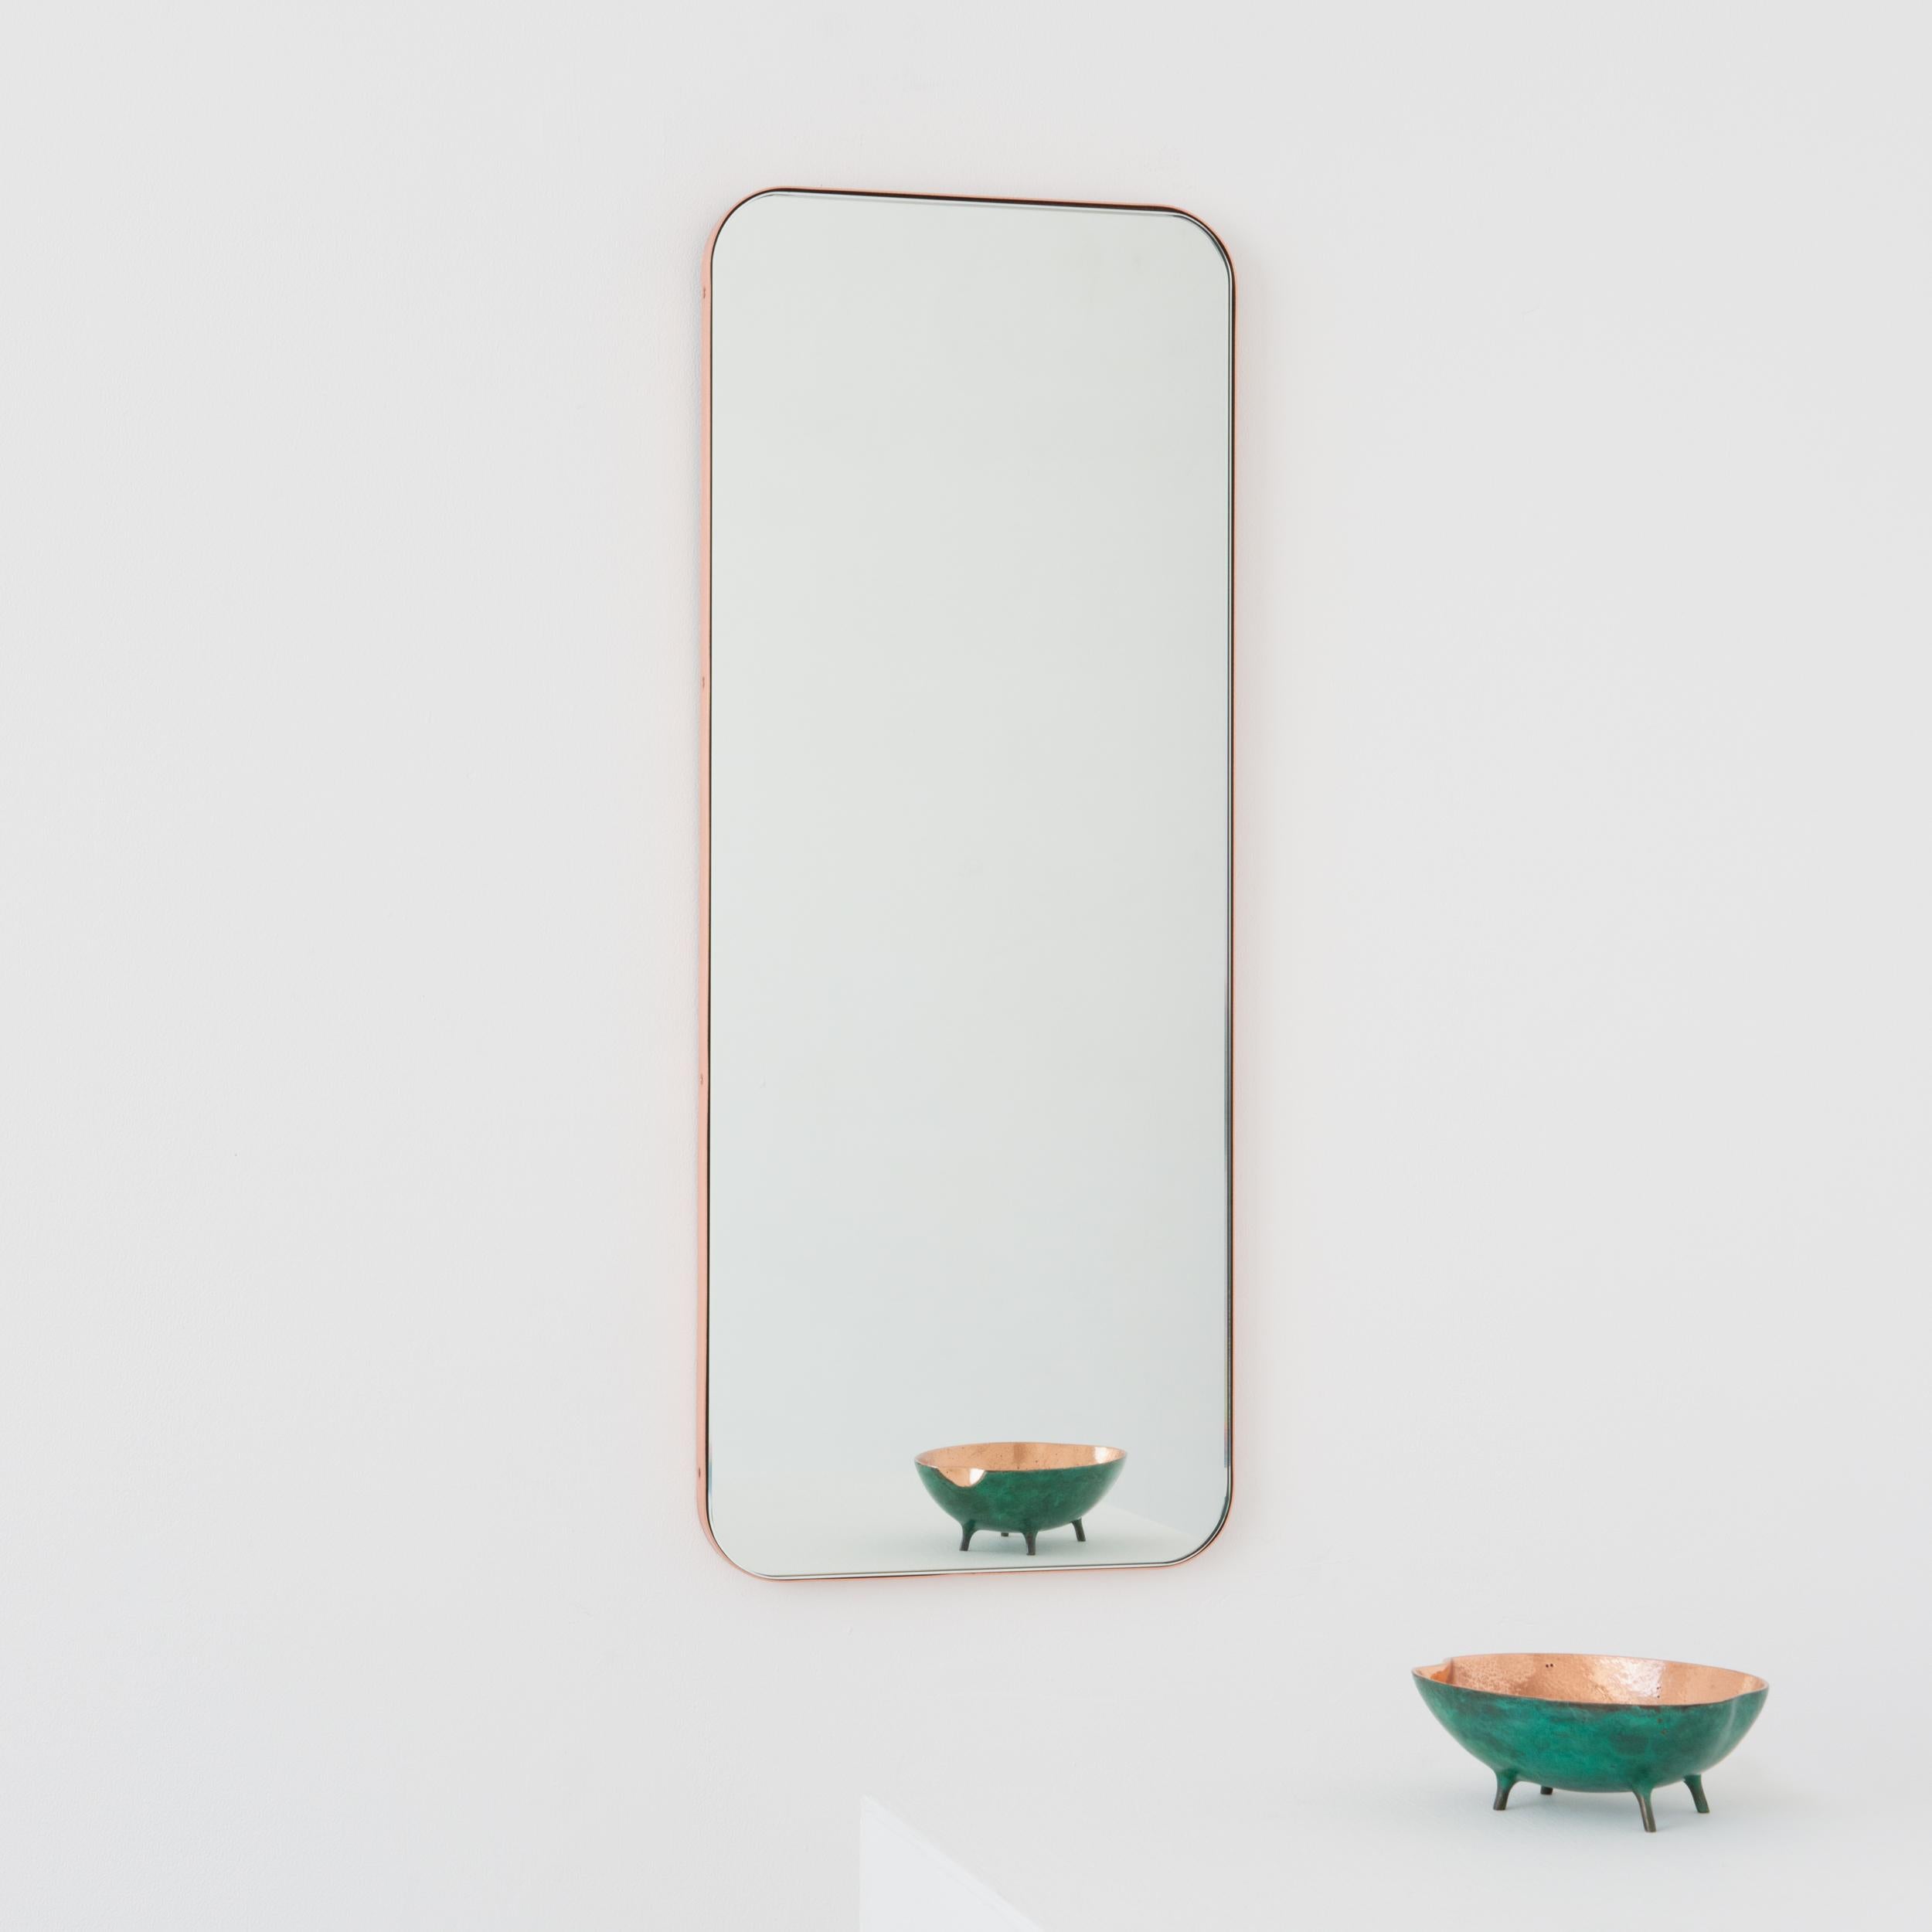 Modern Quadris™ rectangular mirror with an elegant solid brushed copper frame. Designed and handcrafted in London, UK. 

Our mirrors are designed with an integrated French cleat (split batten) system that ensures the mirror is securely mounted flush